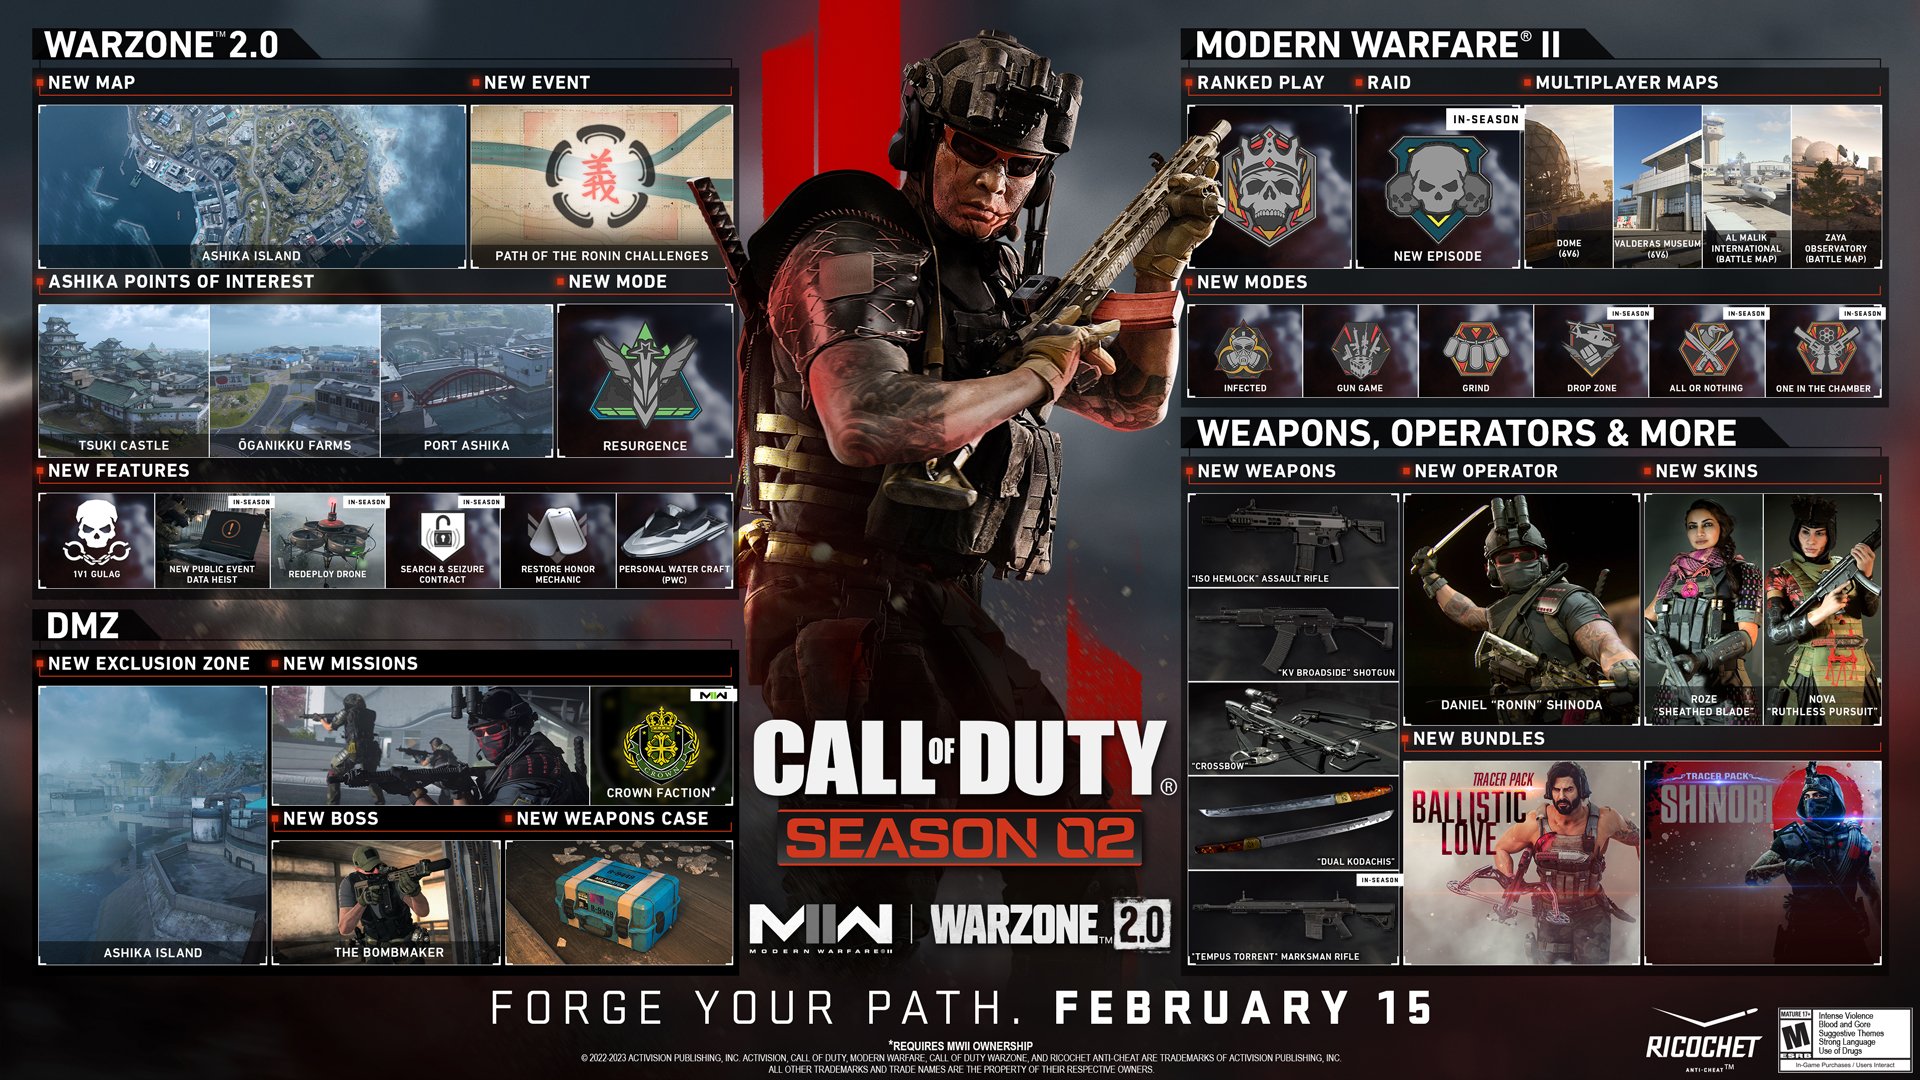 It's almost here Get ready with all the latest Season 02 intel in today's blog:... Tweet From Infinity Ward